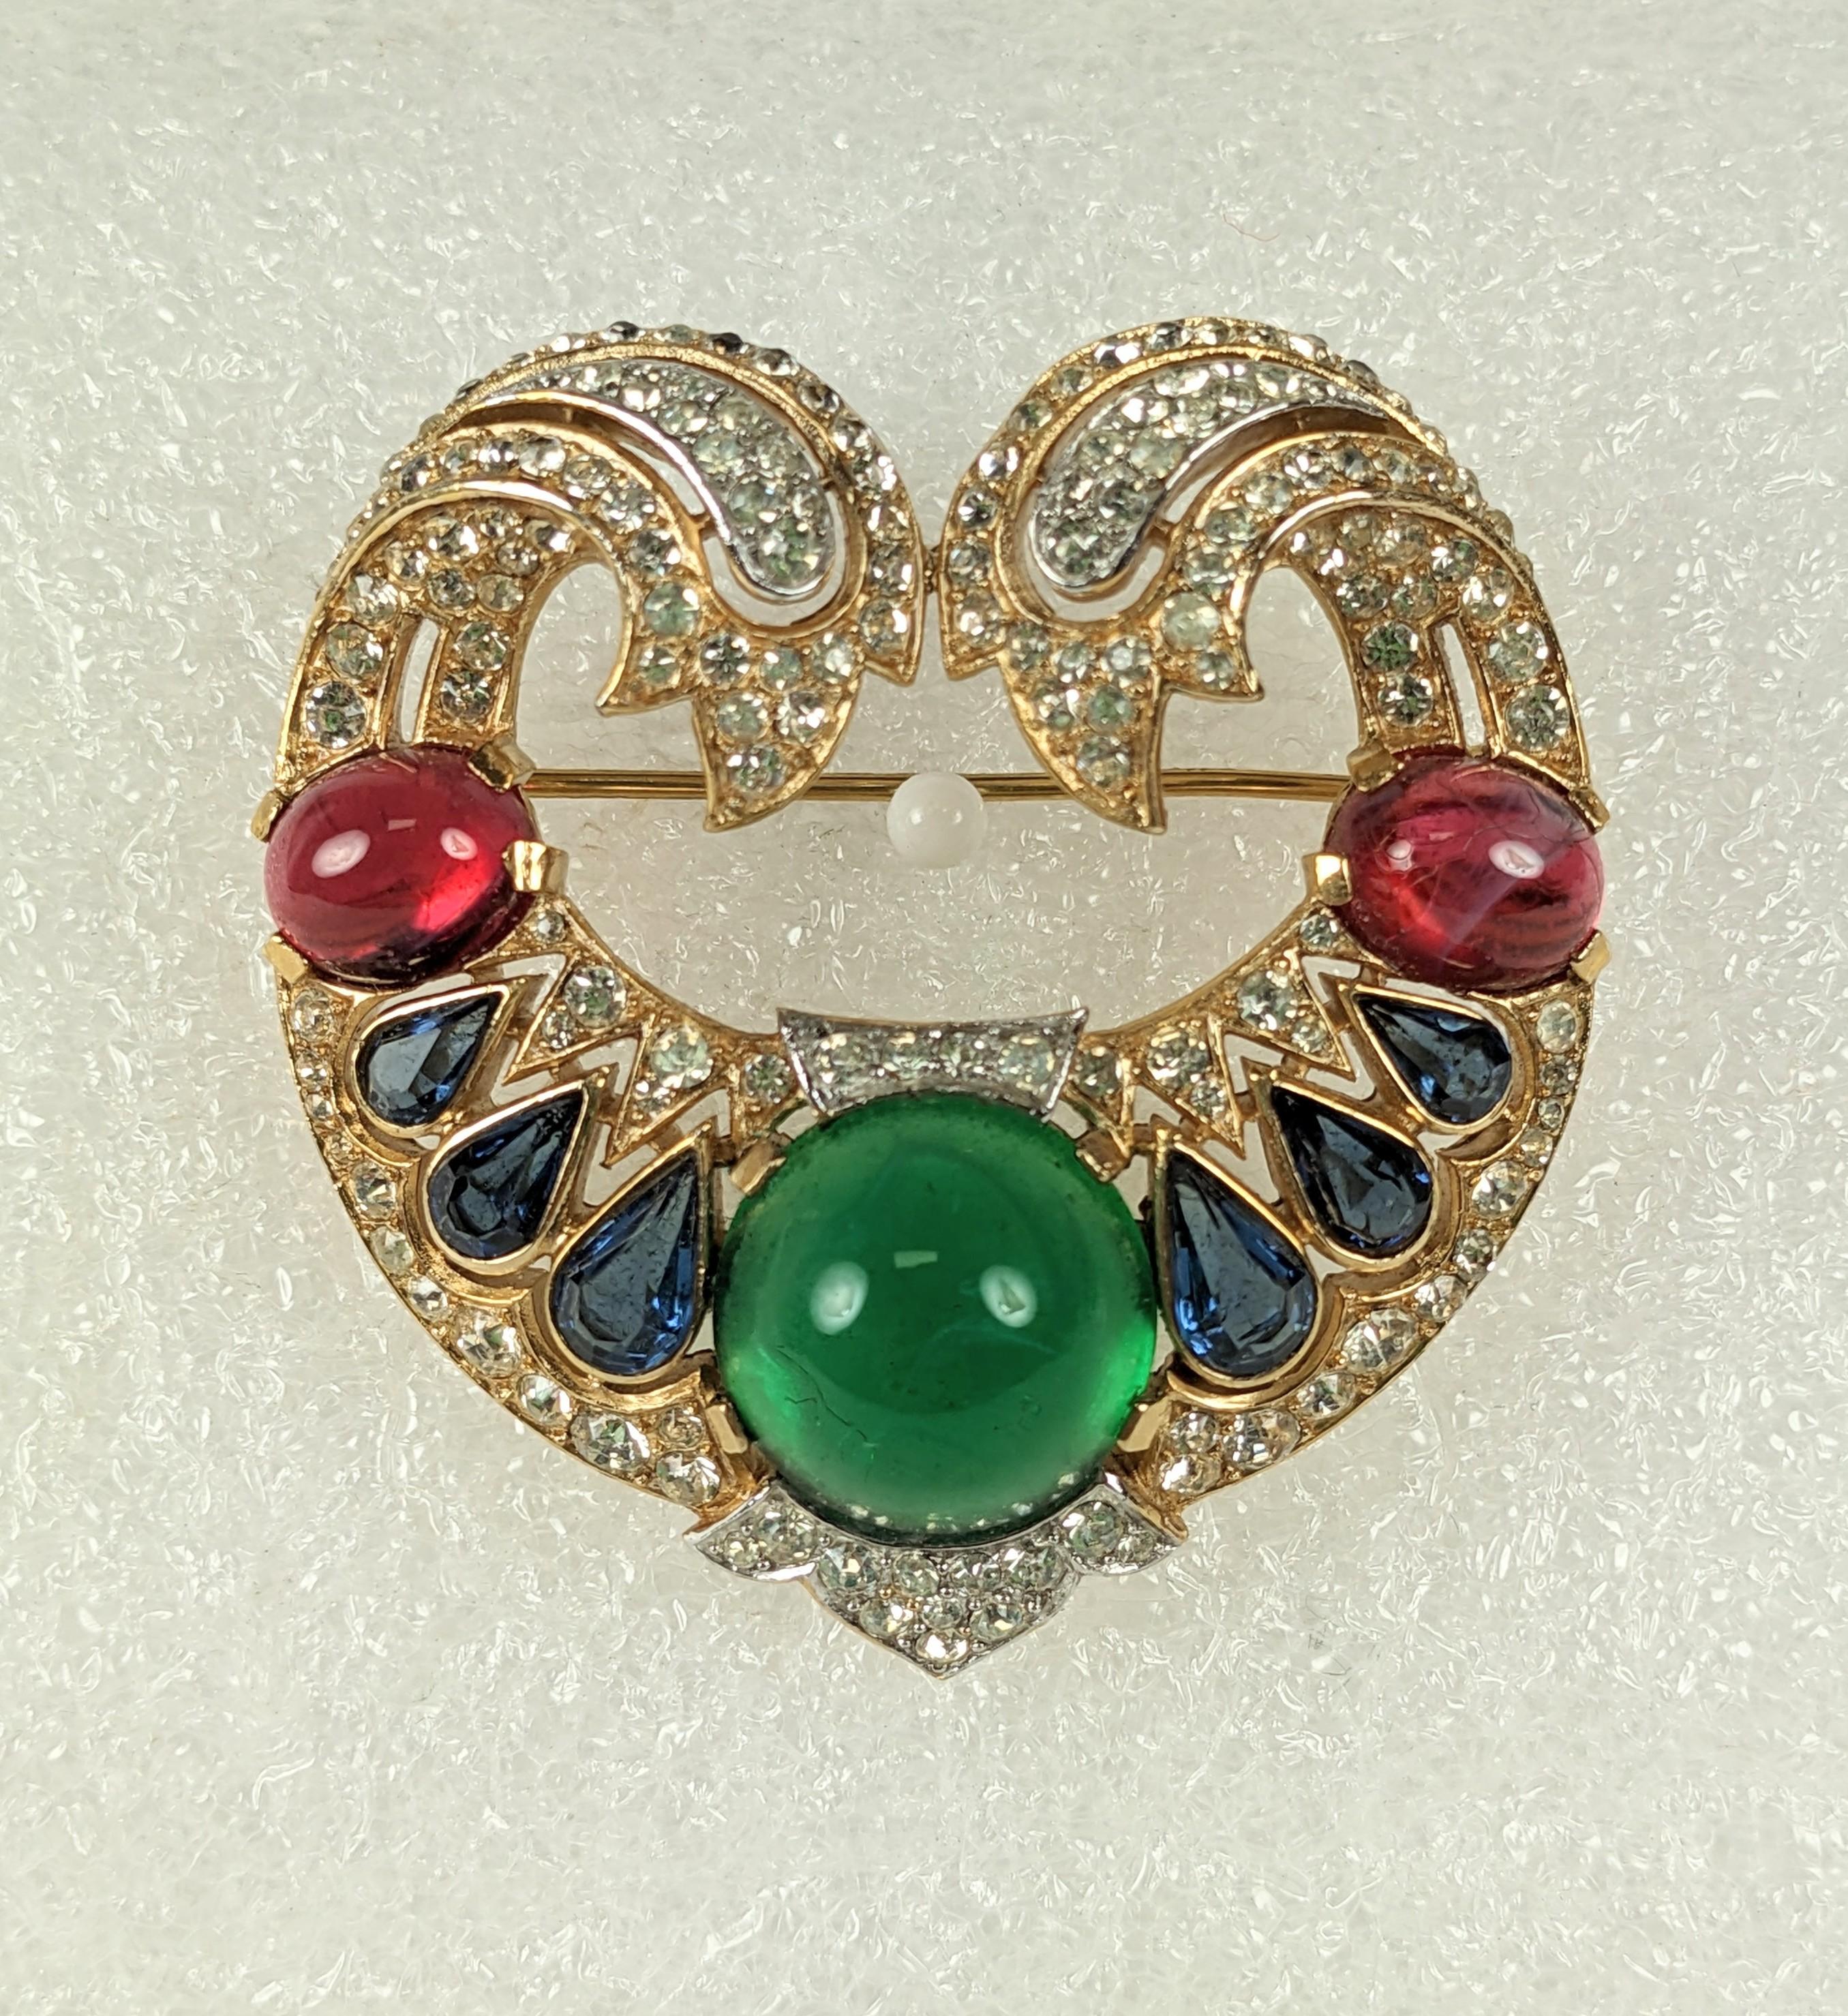 Anglo-Indian Trifari Jewels of India Moghul Brooch For Sale